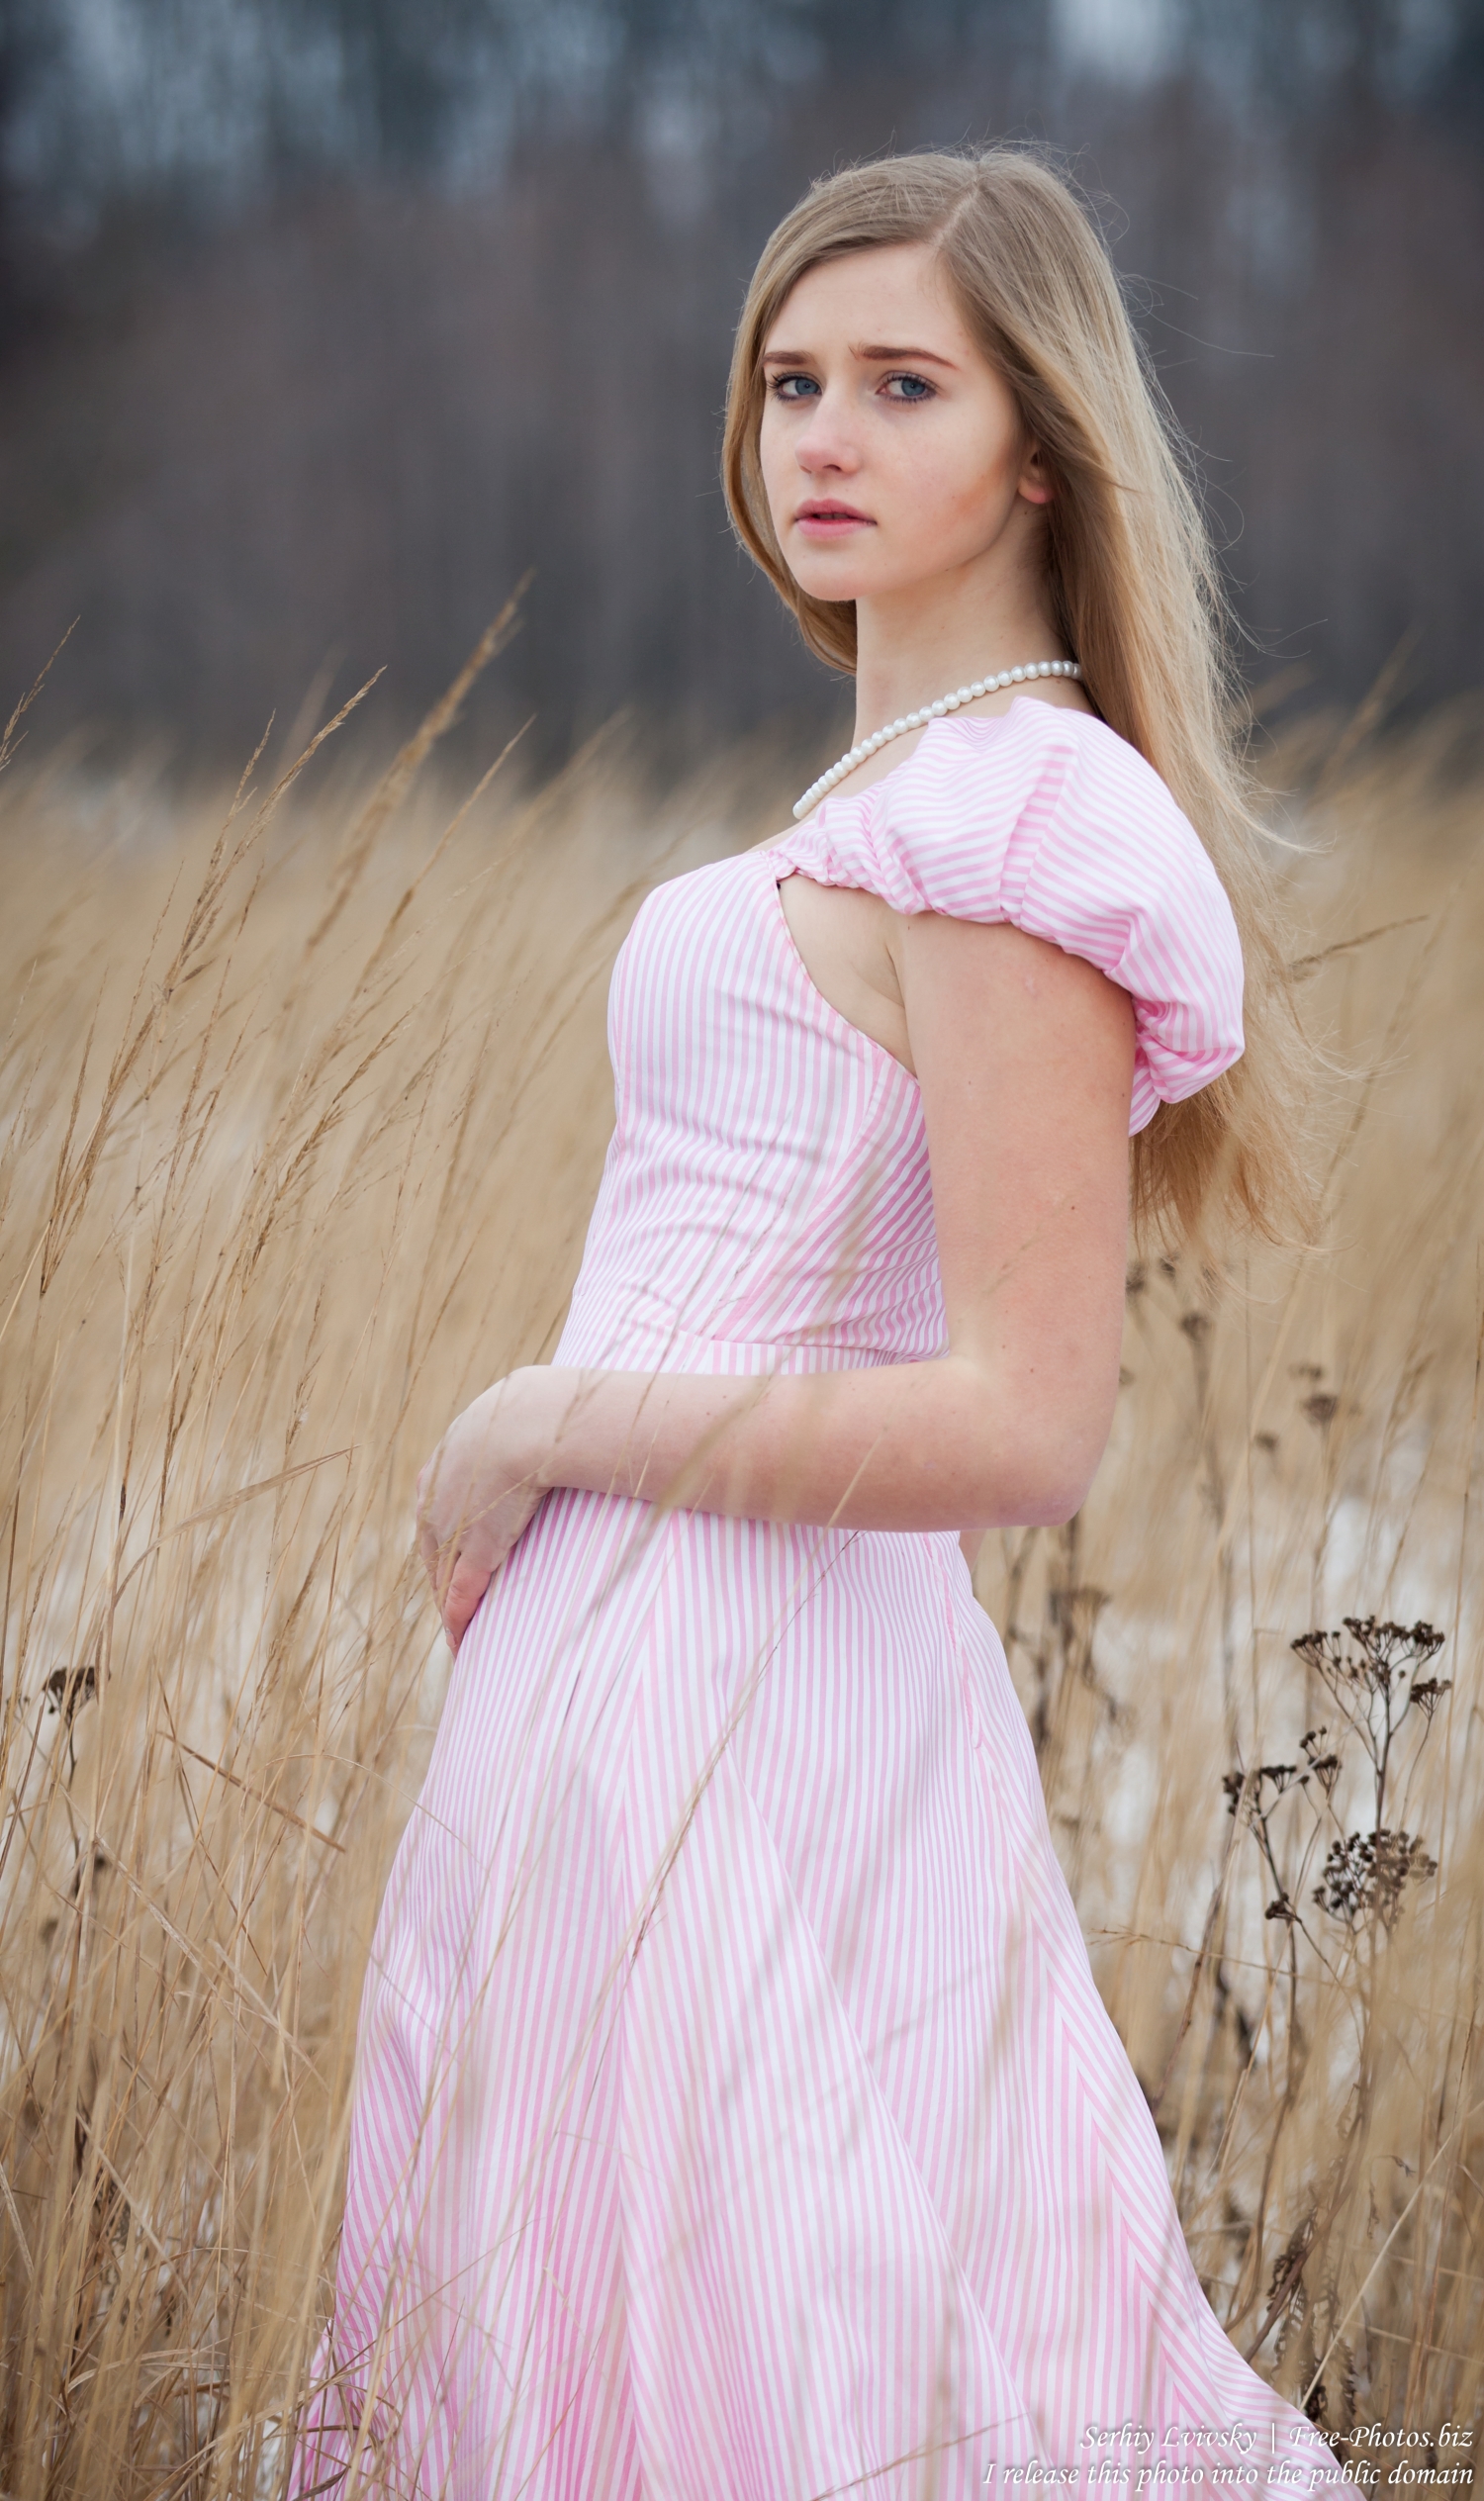 a_natural_blond_17-year-old_girl_photographed_by_serhiy_lvivsky_in_january_2016_02